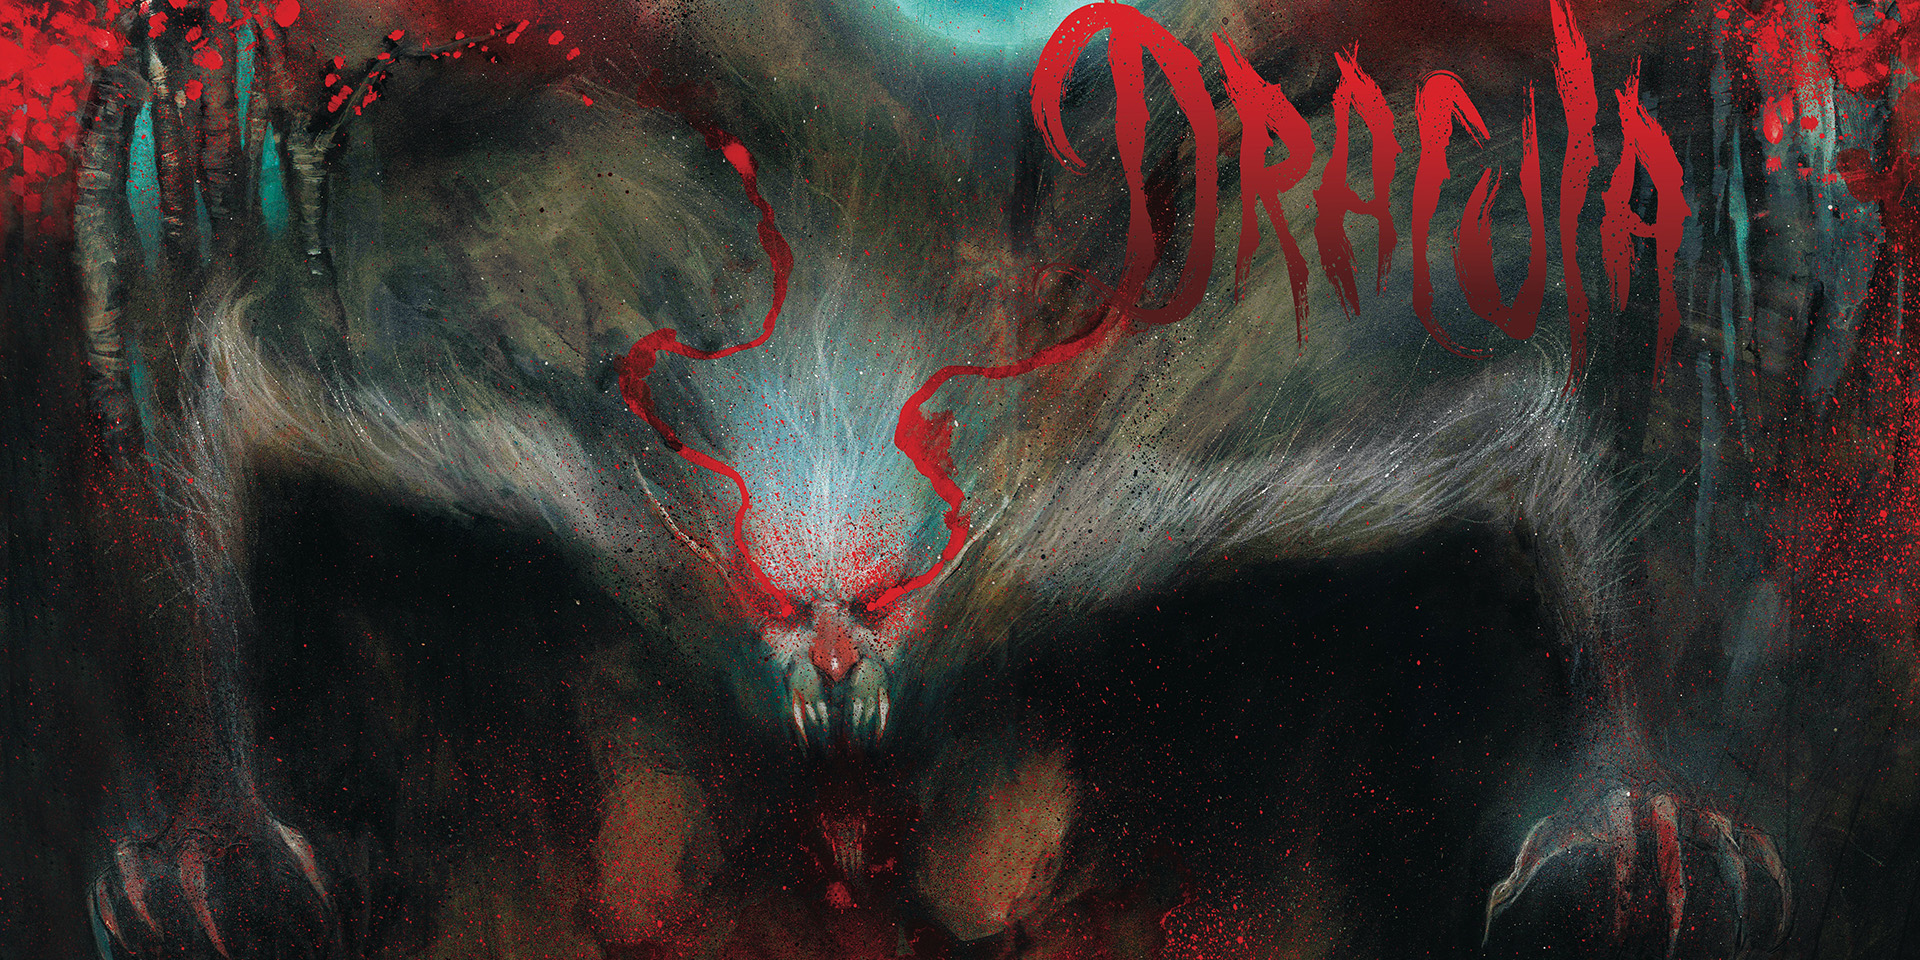 FIRST LOOK AT UNIVERSAL MONSTERS: DRACULA #3